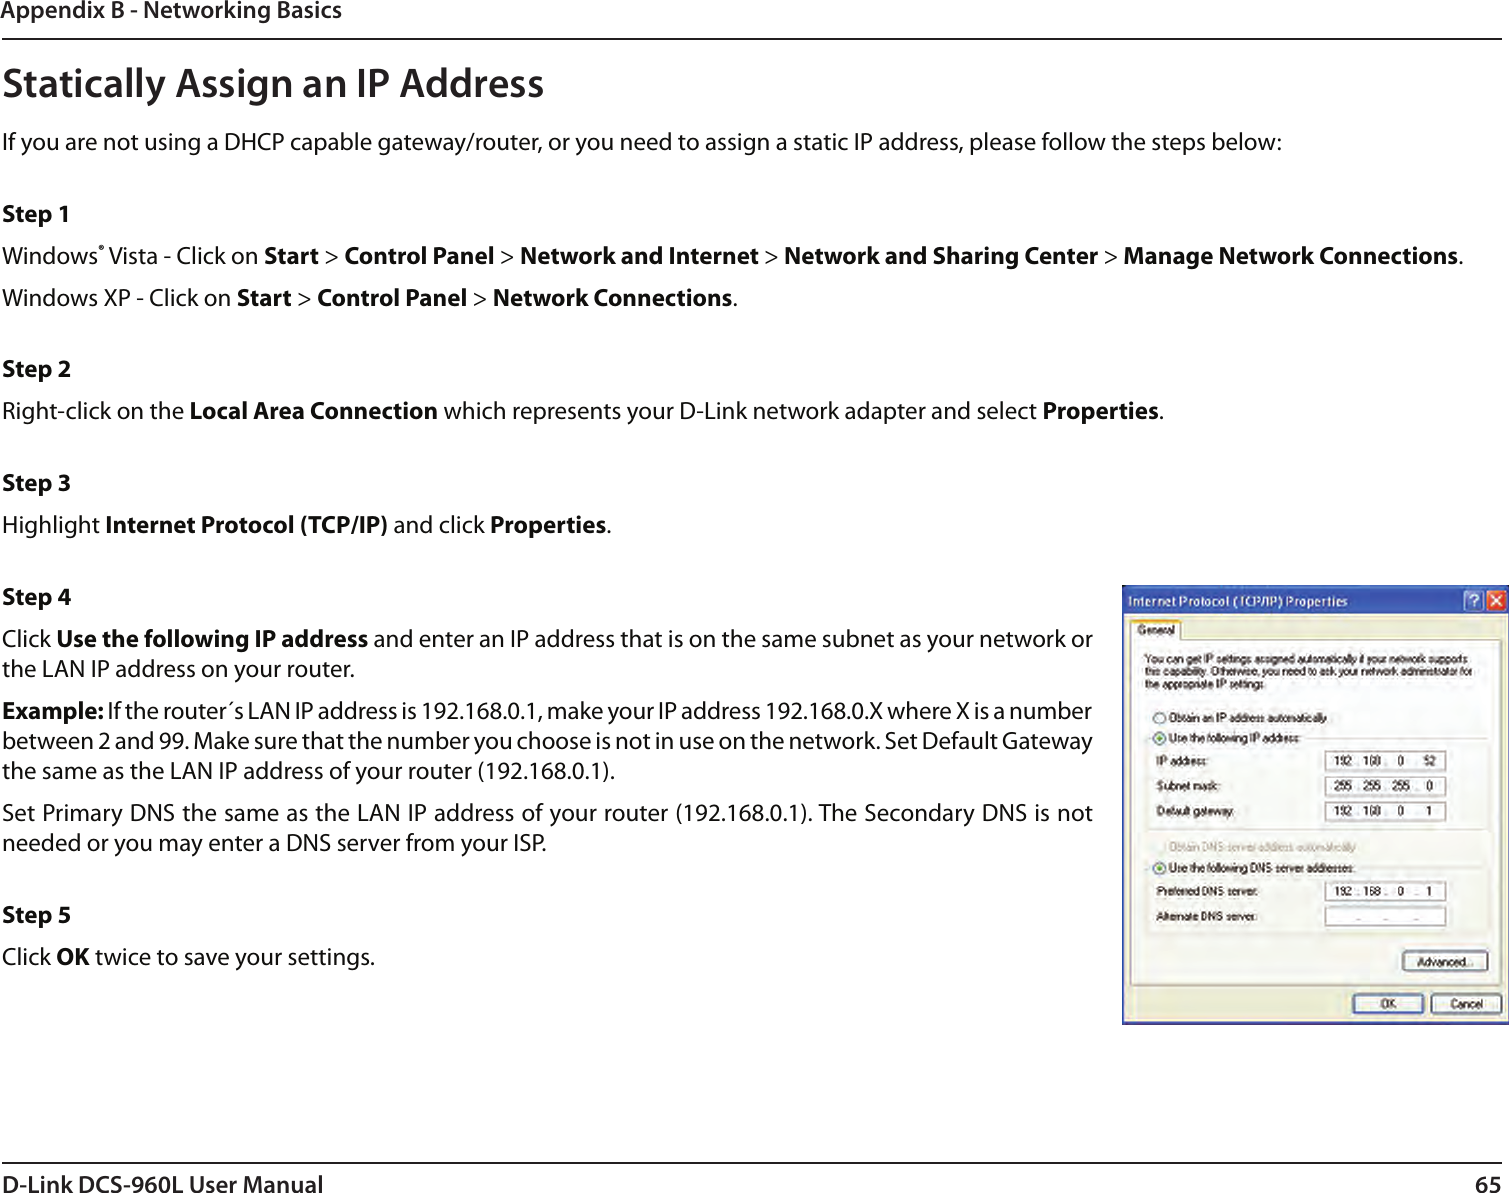 65D-Link DCS-960L User ManualAppendix B - Networking BasicsStatically Assign an IP AddressIf you are not using a DHCP capable gateway/router, or you need to assign a static IP address, please follow the steps below: Step 1Windows® Vista - Click on Start &gt; Control Panel &gt; Network and Internet &gt; Network and Sharing Center &gt; Manage Network Connections. Windows XP - Click on Start &gt; Control Panel &gt; Network Connections. Step 2Right-click on the Local Area Connection which represents your D-Link network adapter and select Properties. Step 3Highlight Internet Protocol (TCP/IP) and click Properties. Step 4Click Use the following IP address and enter an IP address that is on the same subnet as your network or the LAN IP address on your router. Example: If the router´s LAN IP address is 192.168.0.1, make your IP address 192.168.0.X where X is a number between 2 and 99. Make sure that the number you choose is not in use on the network. Set Default Gateway the same as the LAN IP address of your router (192.168.0.1). Set Primary DNS the same as the LAN IP address of your router (192.168.0.1). The Secondary DNS is not needed or you may enter a DNS server from your ISP. Step 5Click OK twice to save your settings.